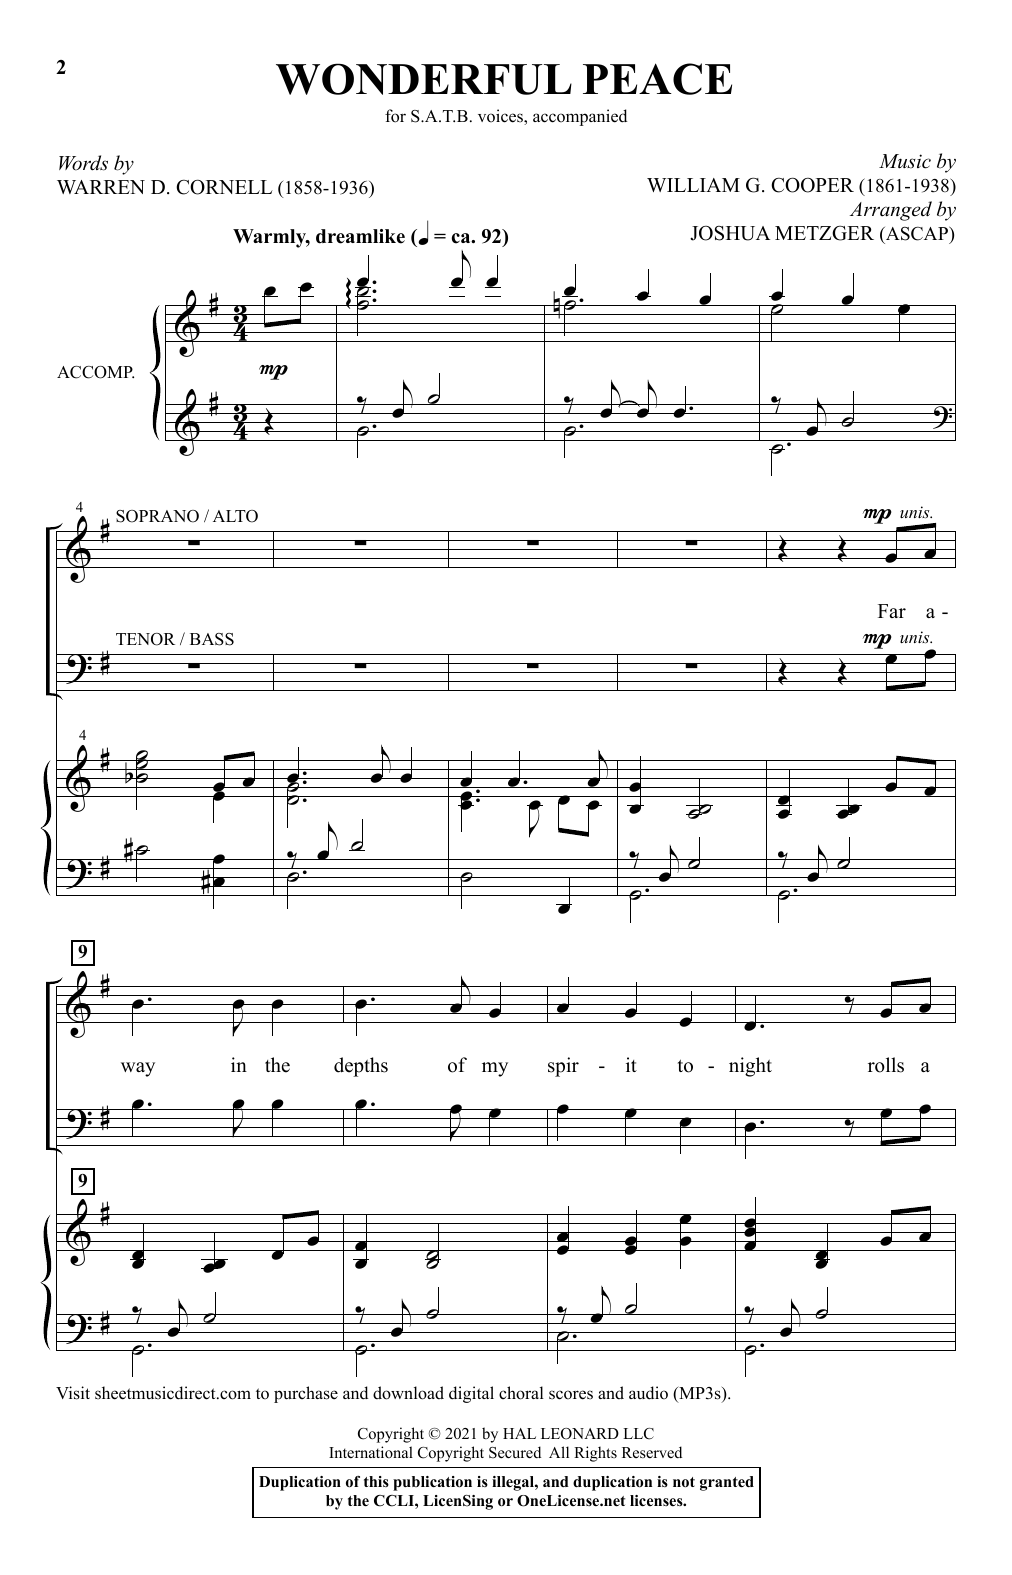 Download Warren D. Cornell and William G. Coo Wonderful Peace (arr. Joshua Metzger) Sheet Music